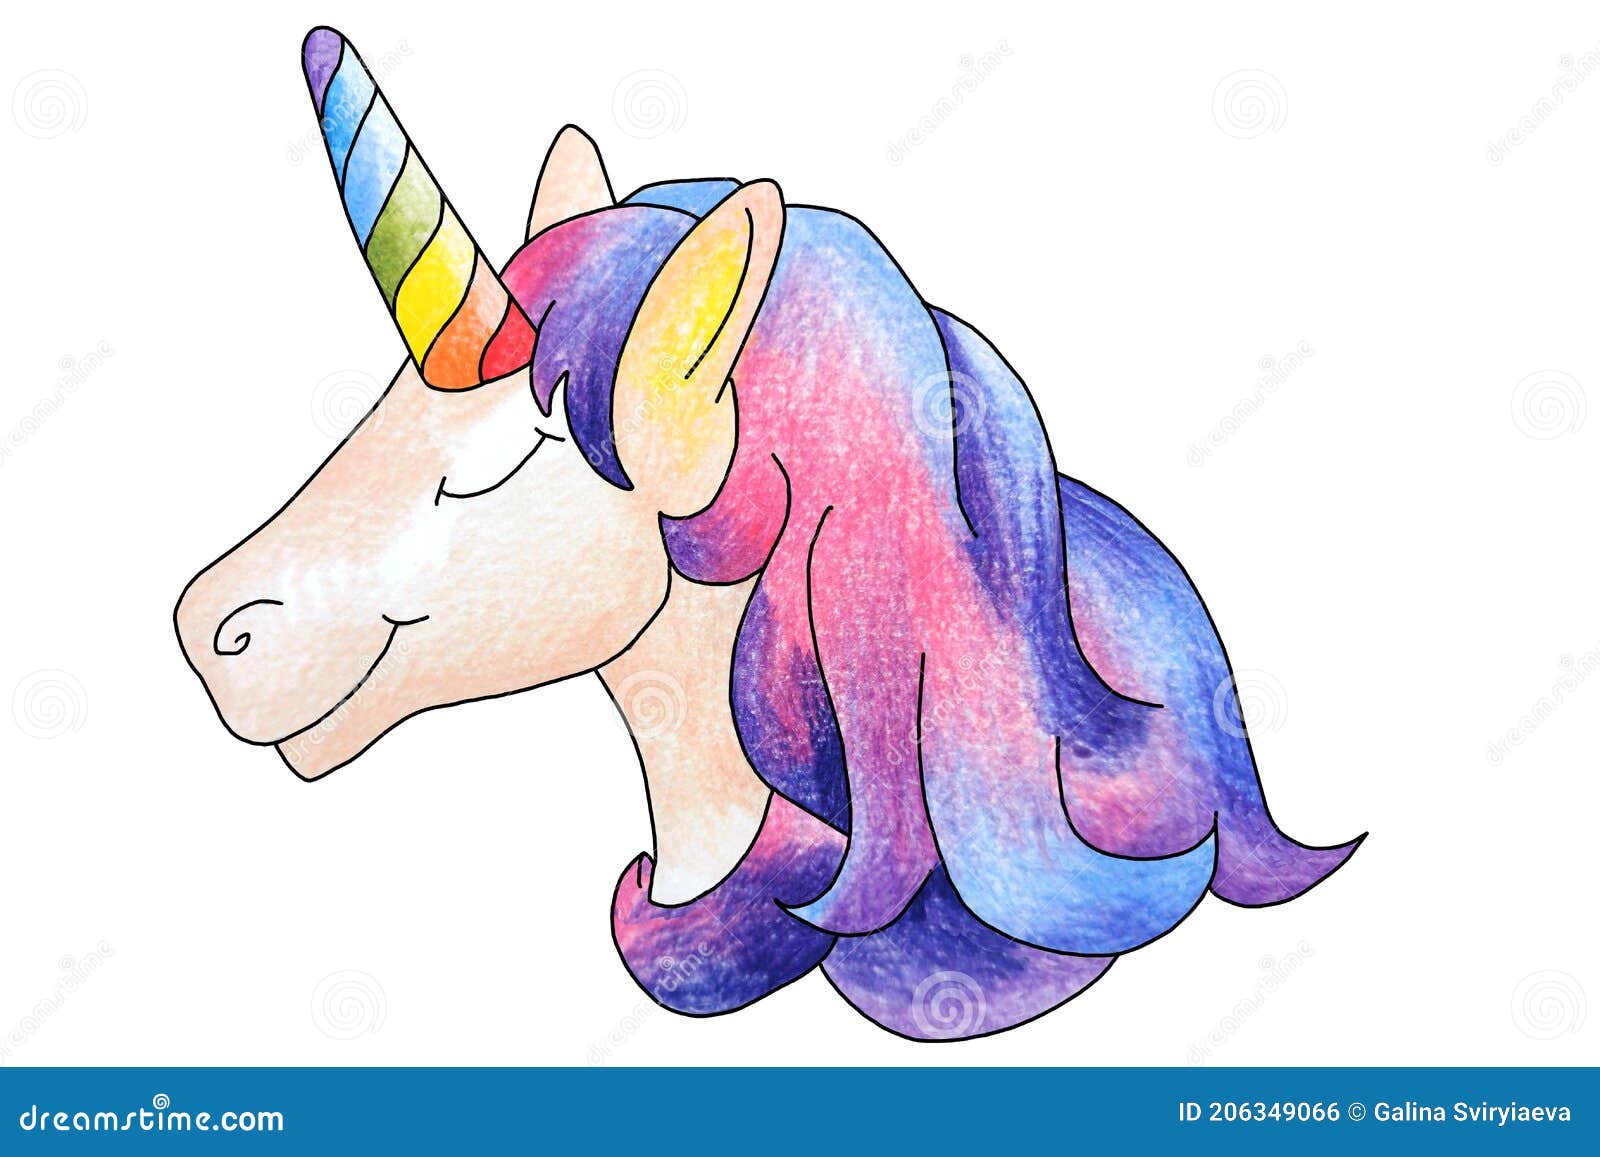 How to draw Unicorn #forkids #drawing #howtodraw #stepbysteptutorial #... |  drawing step by step tutorial | TikTok